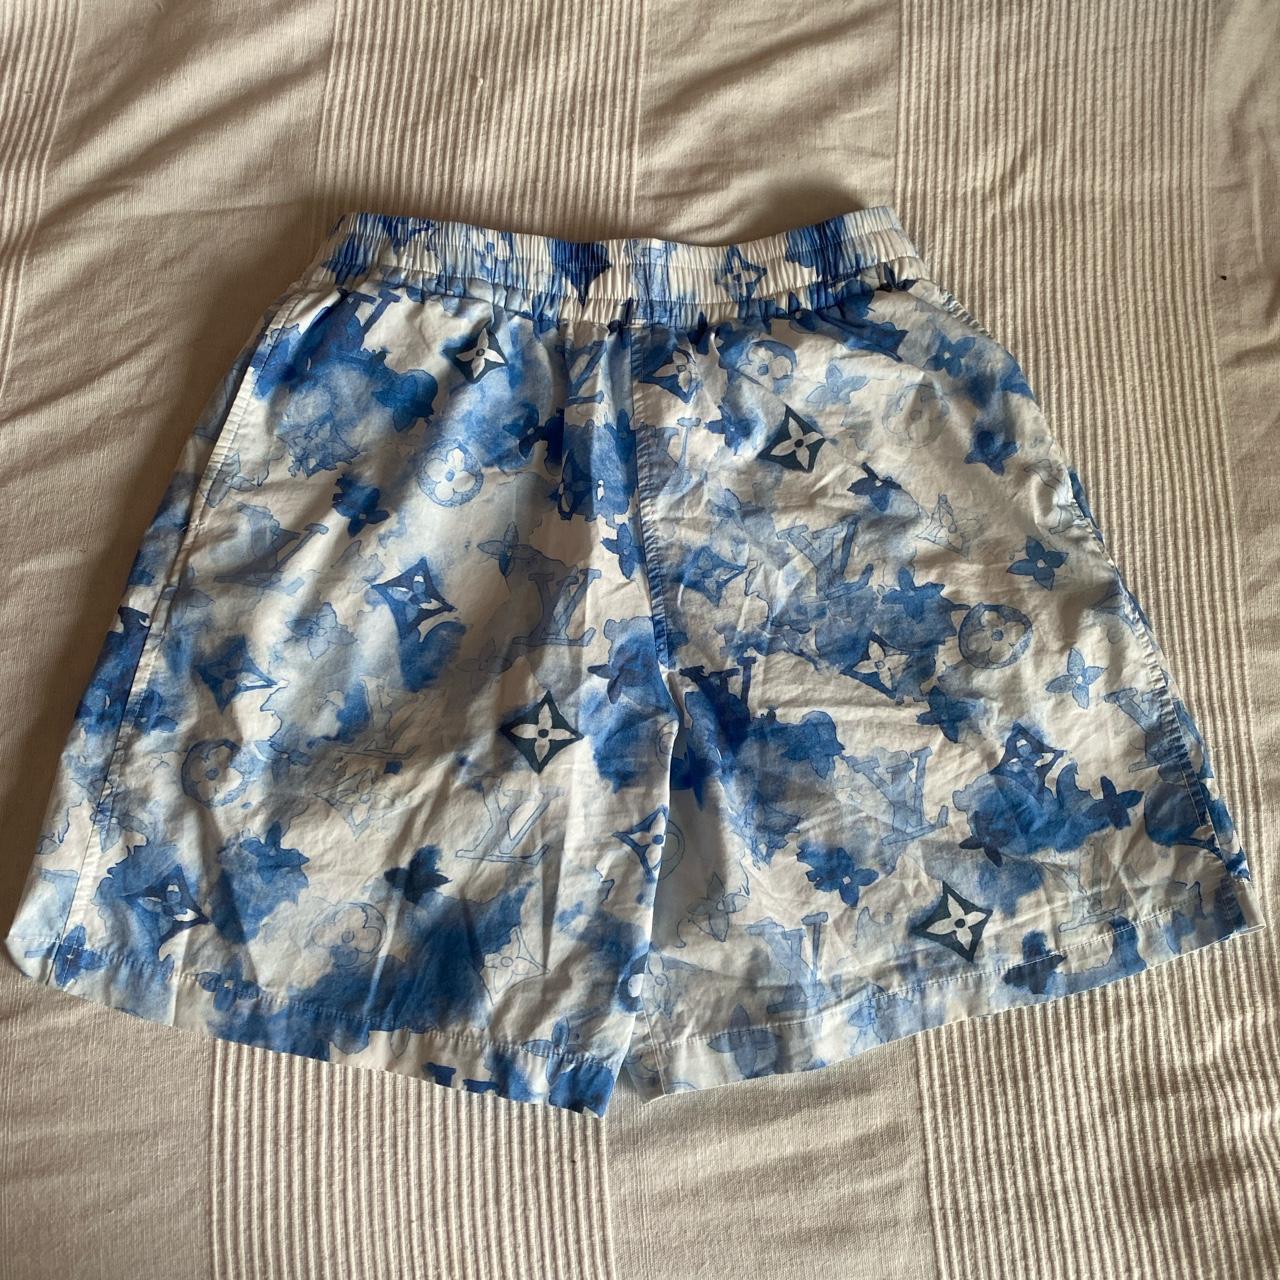 Selling these Louis Vuitton shorts brand new with - Depop